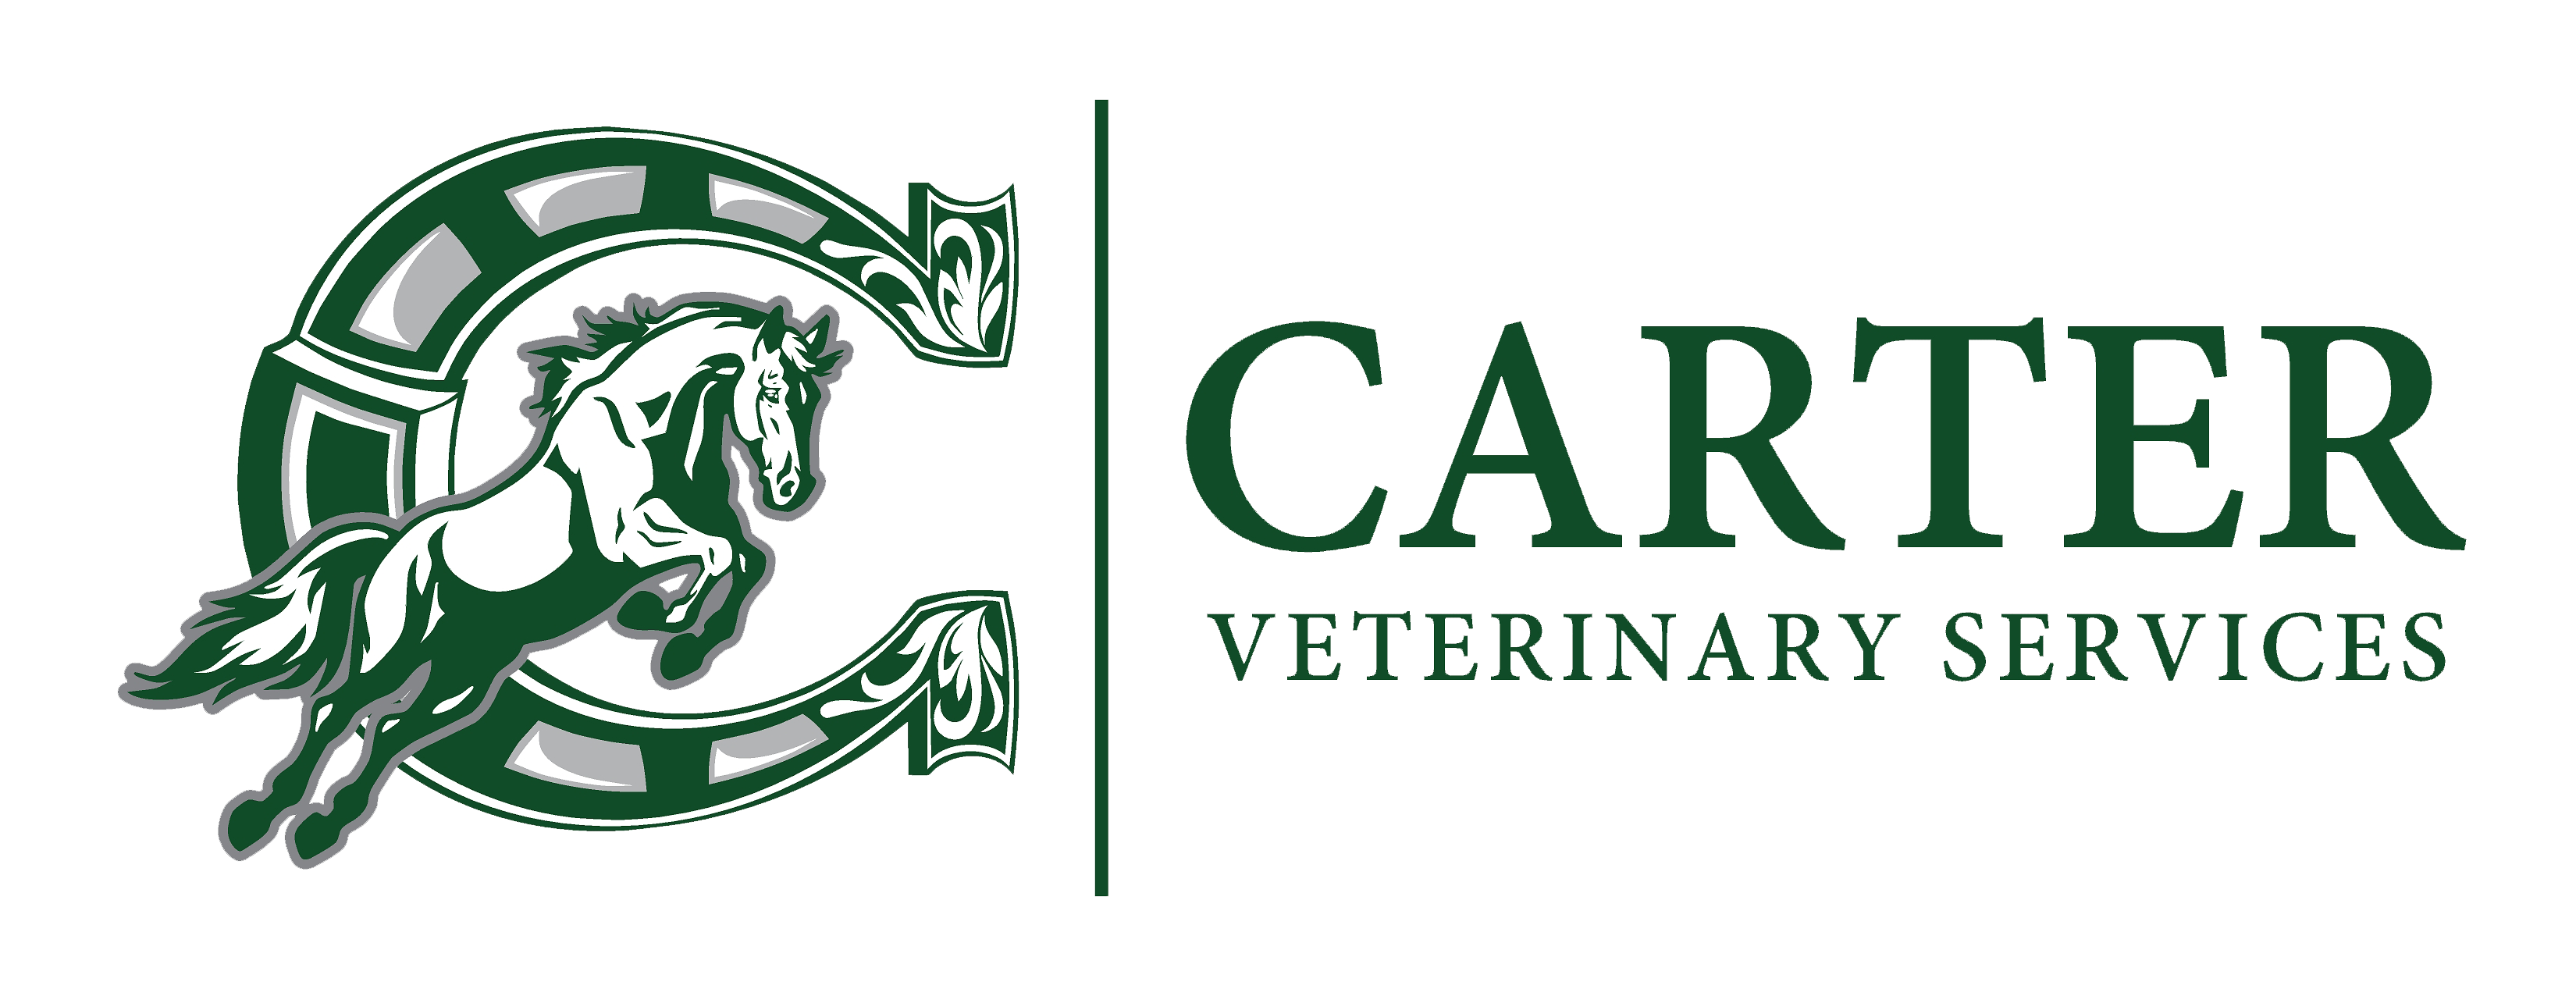 Carter Veterinary Services